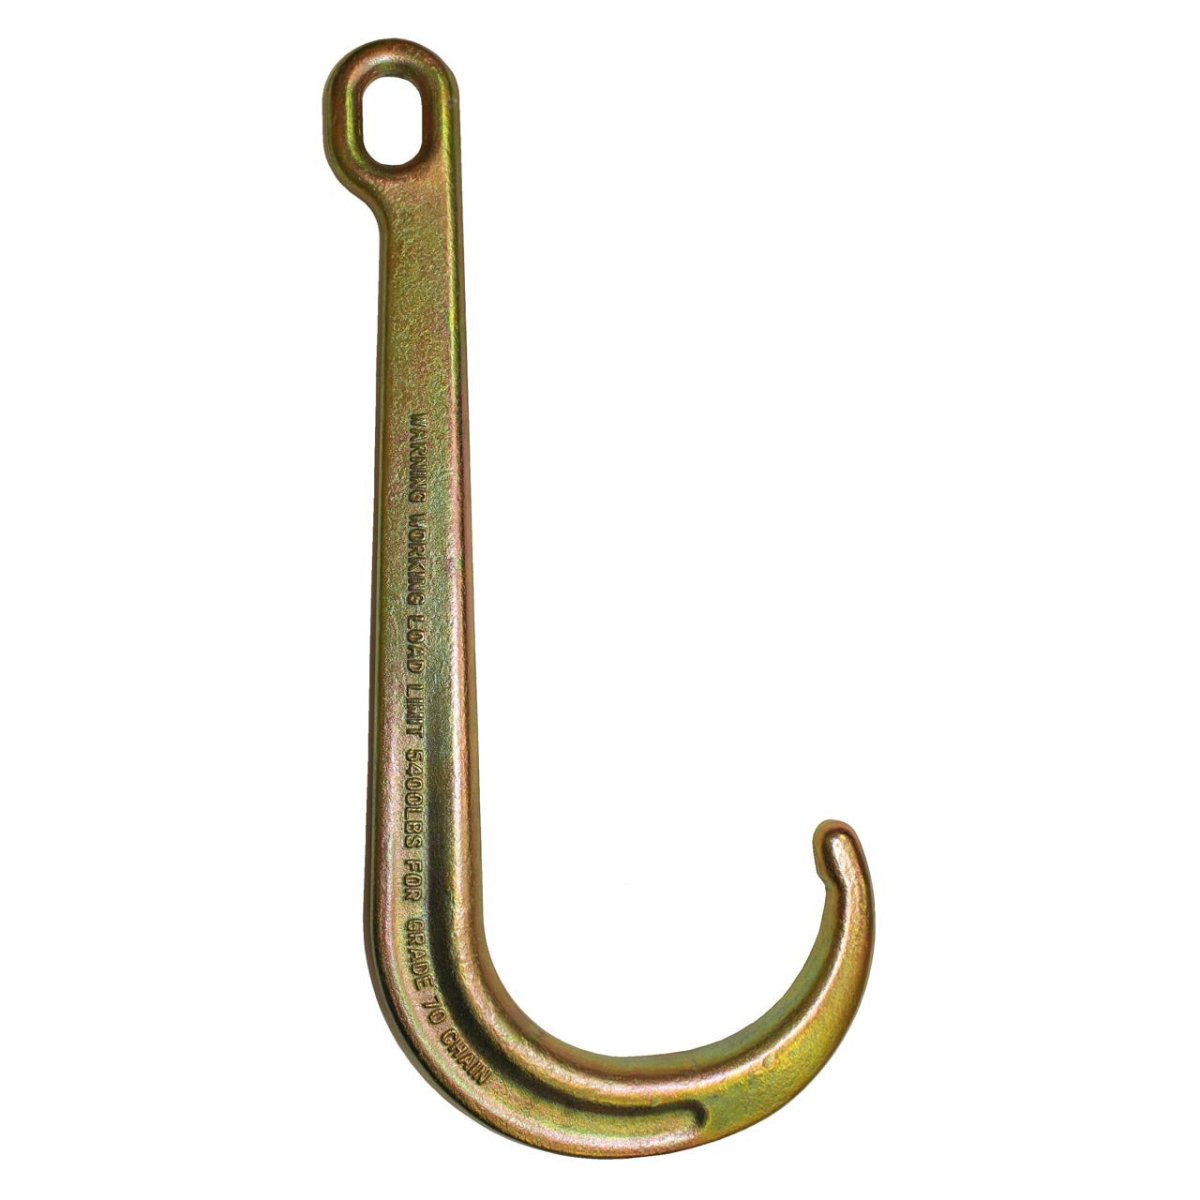 B/A Products Co. 15" Classic Style J Hook on Link - Z11-2 - starequipmentsales